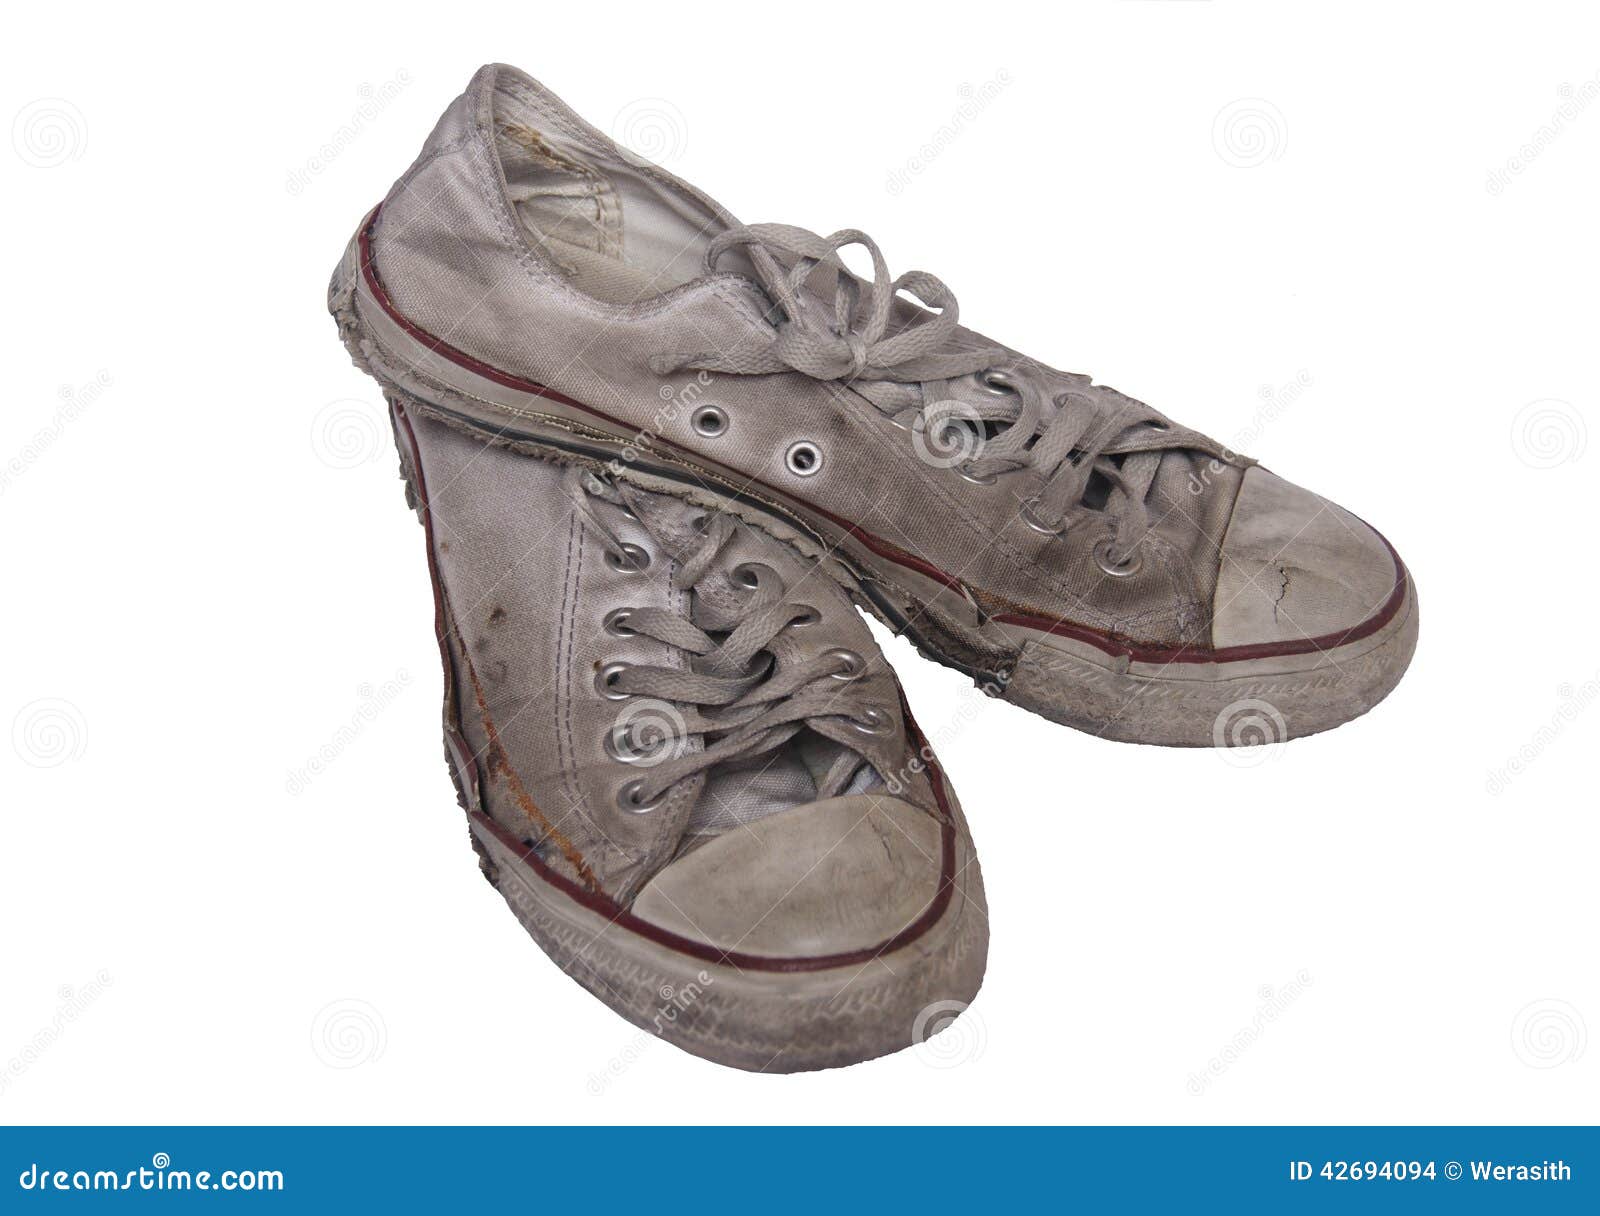 Old sneakers stock photo. Image of blue, retro, rugged - 42694094